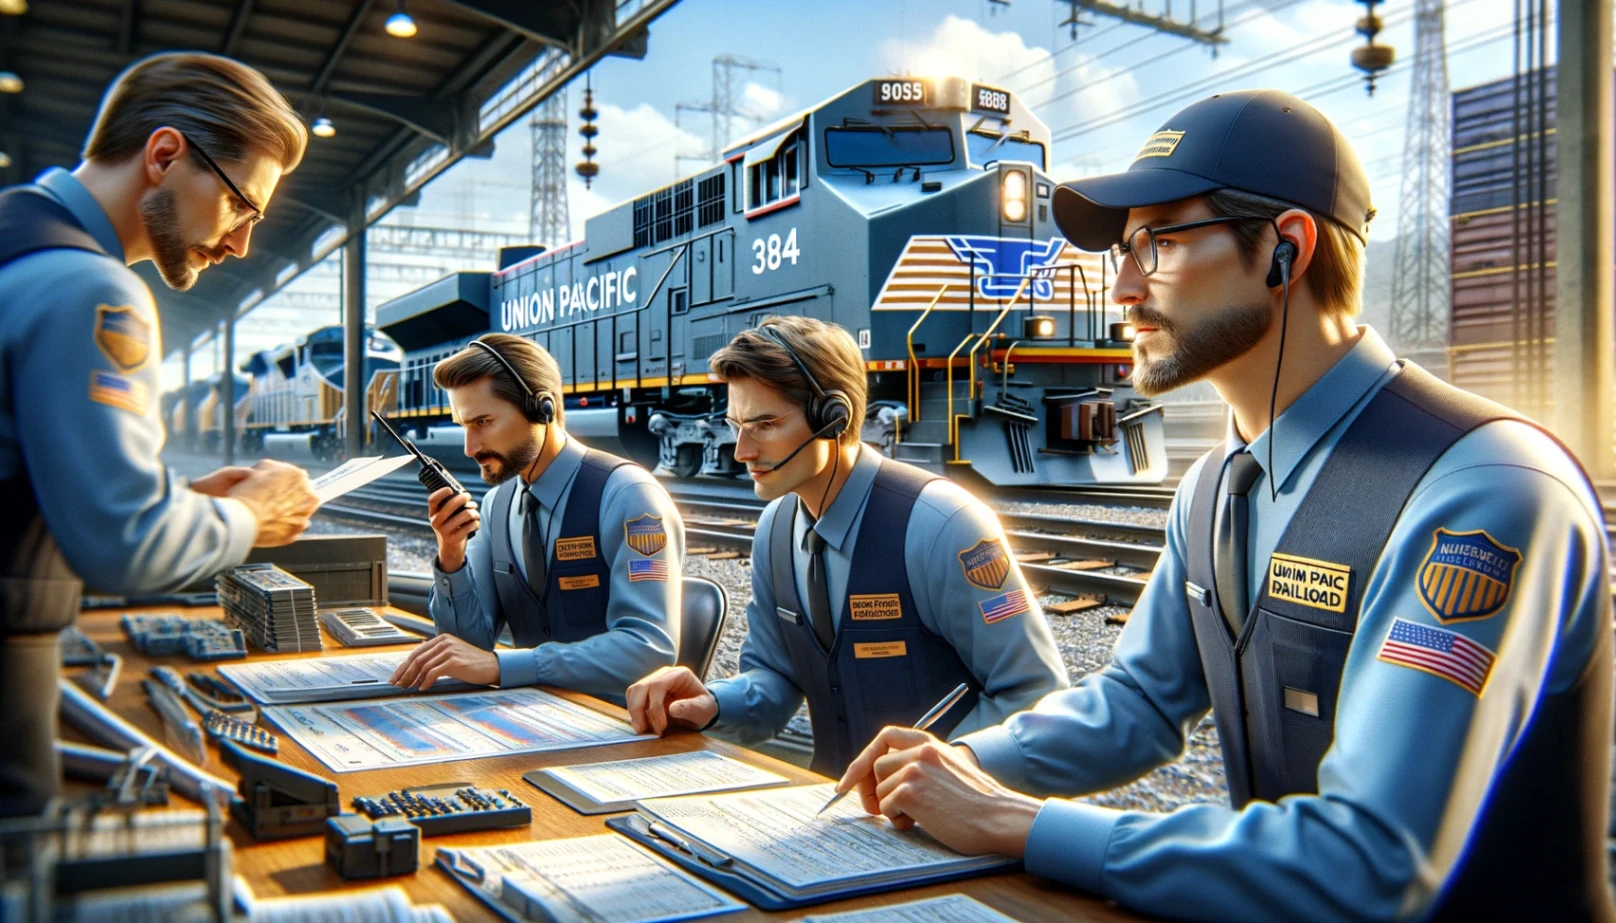 How to Apply for Positions at Union Pacific Railroad